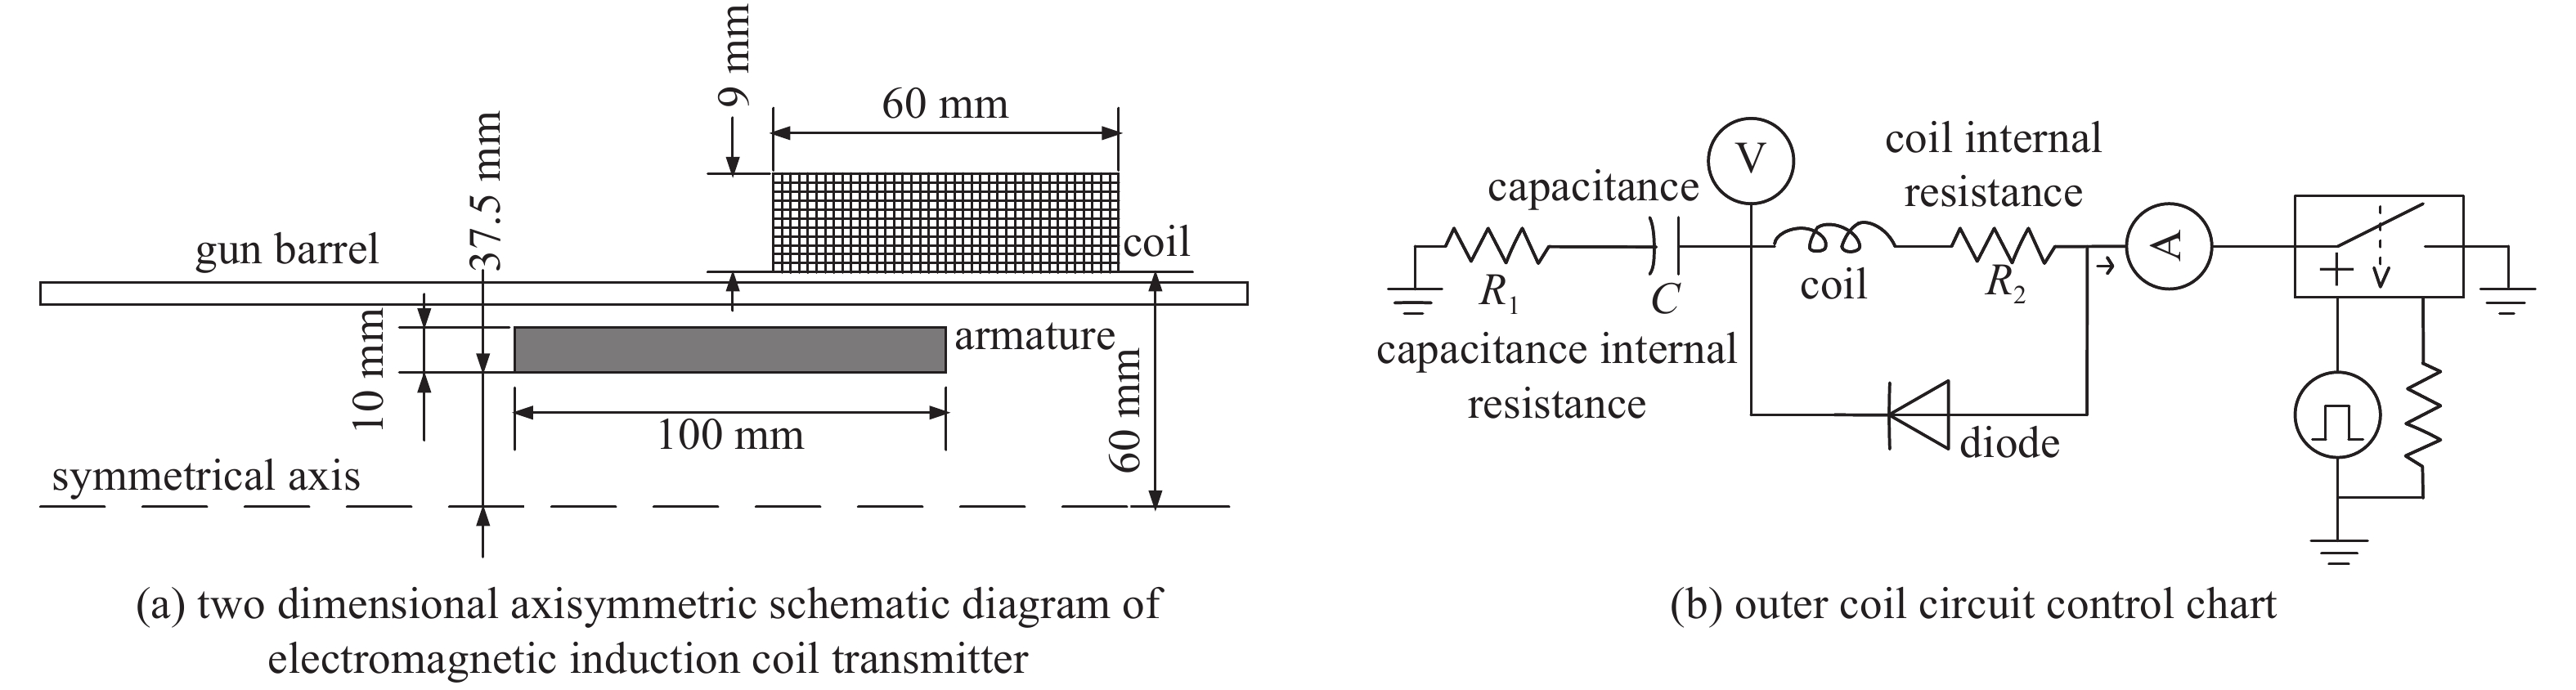 single stage electromagnetic induction coil transmitter model and corresponding parameters